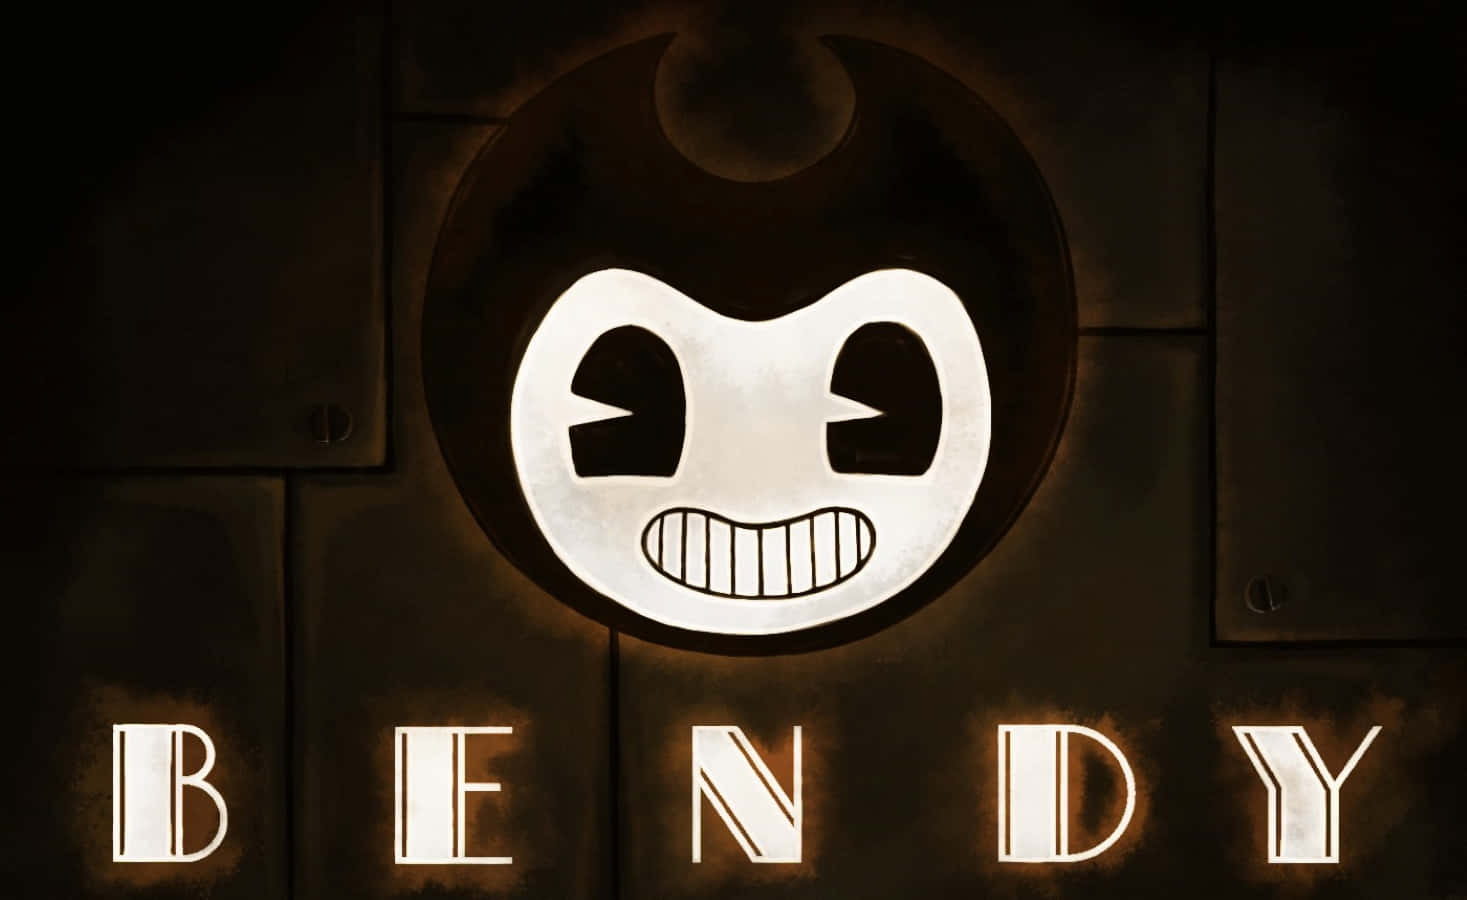 Bendy In A Dark, Mysterious World Background